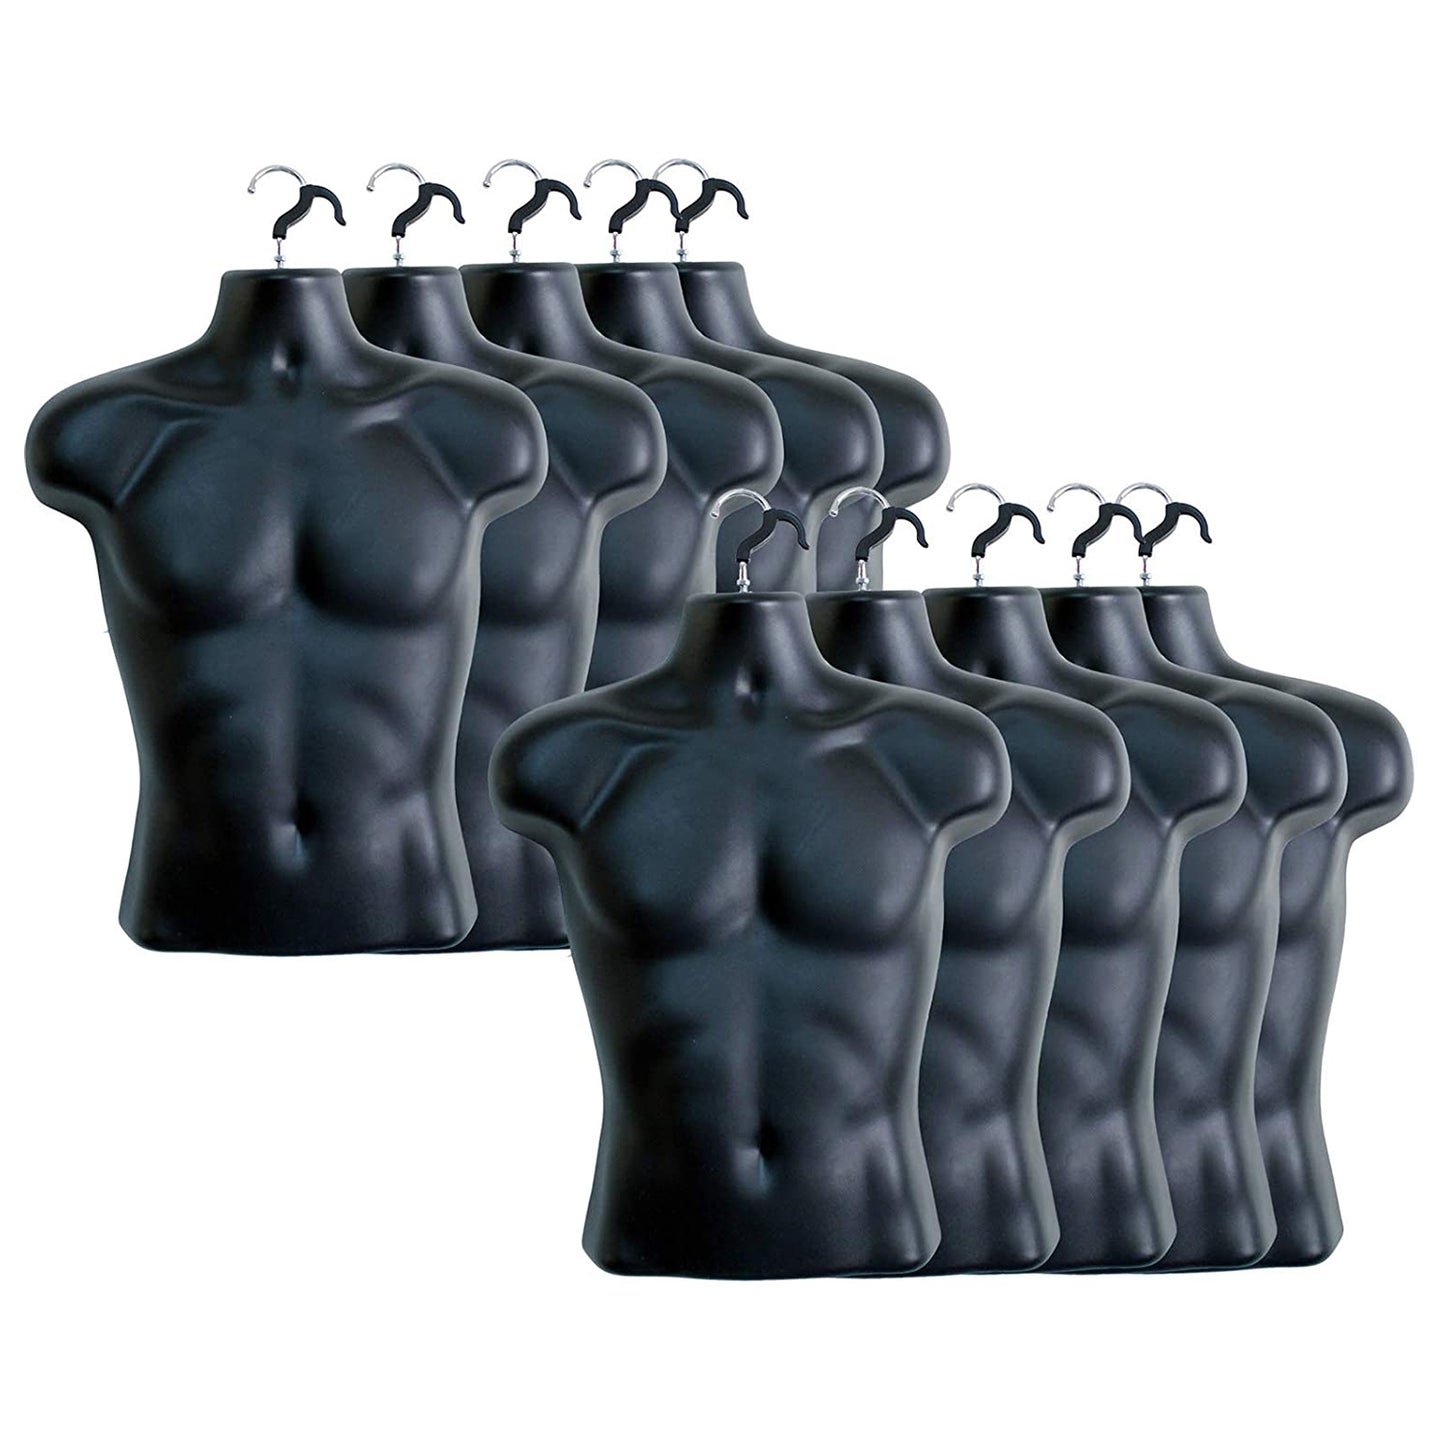 Male Mannequin Torso, Plastic Dress Body Form T-shirt Display Hanging Hollow Back Body S-M Clothing Sizes (Black)